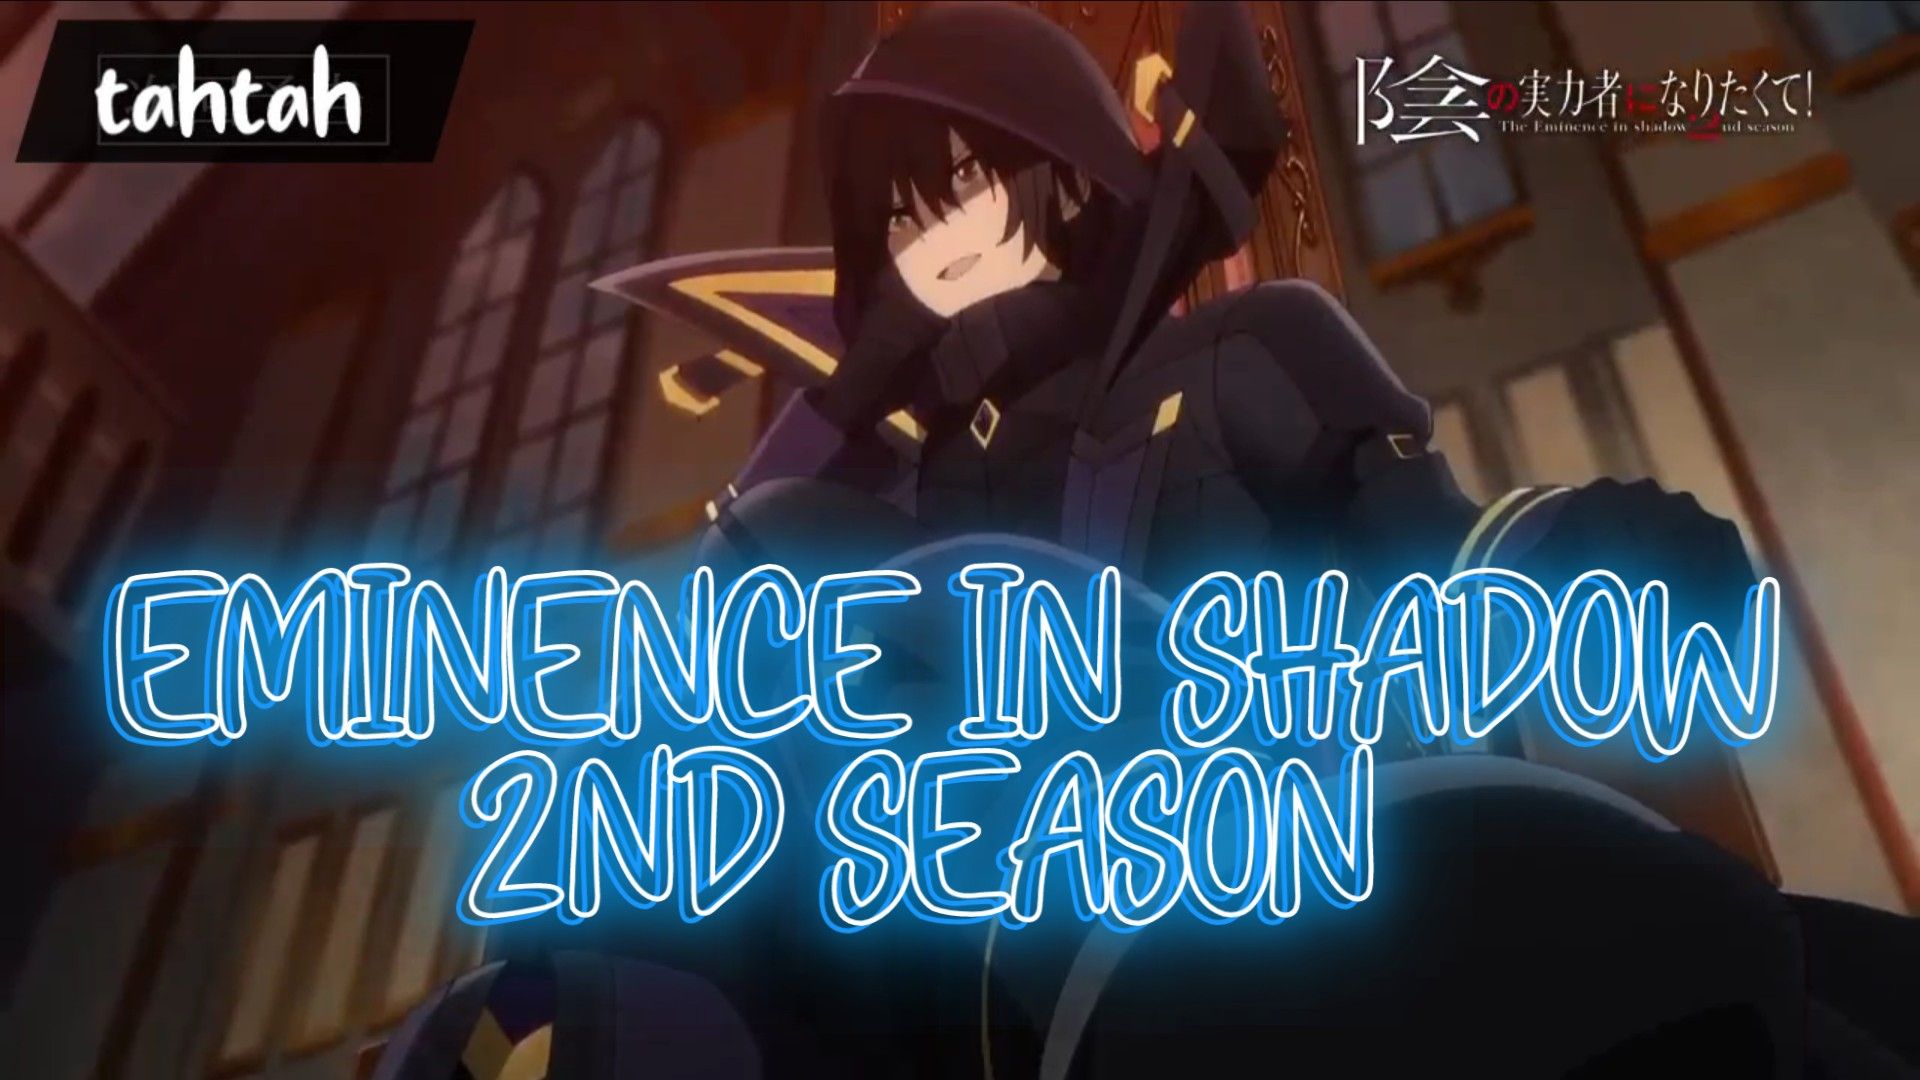 How to watch The Eminence in Shadow Season 2 – where to stream